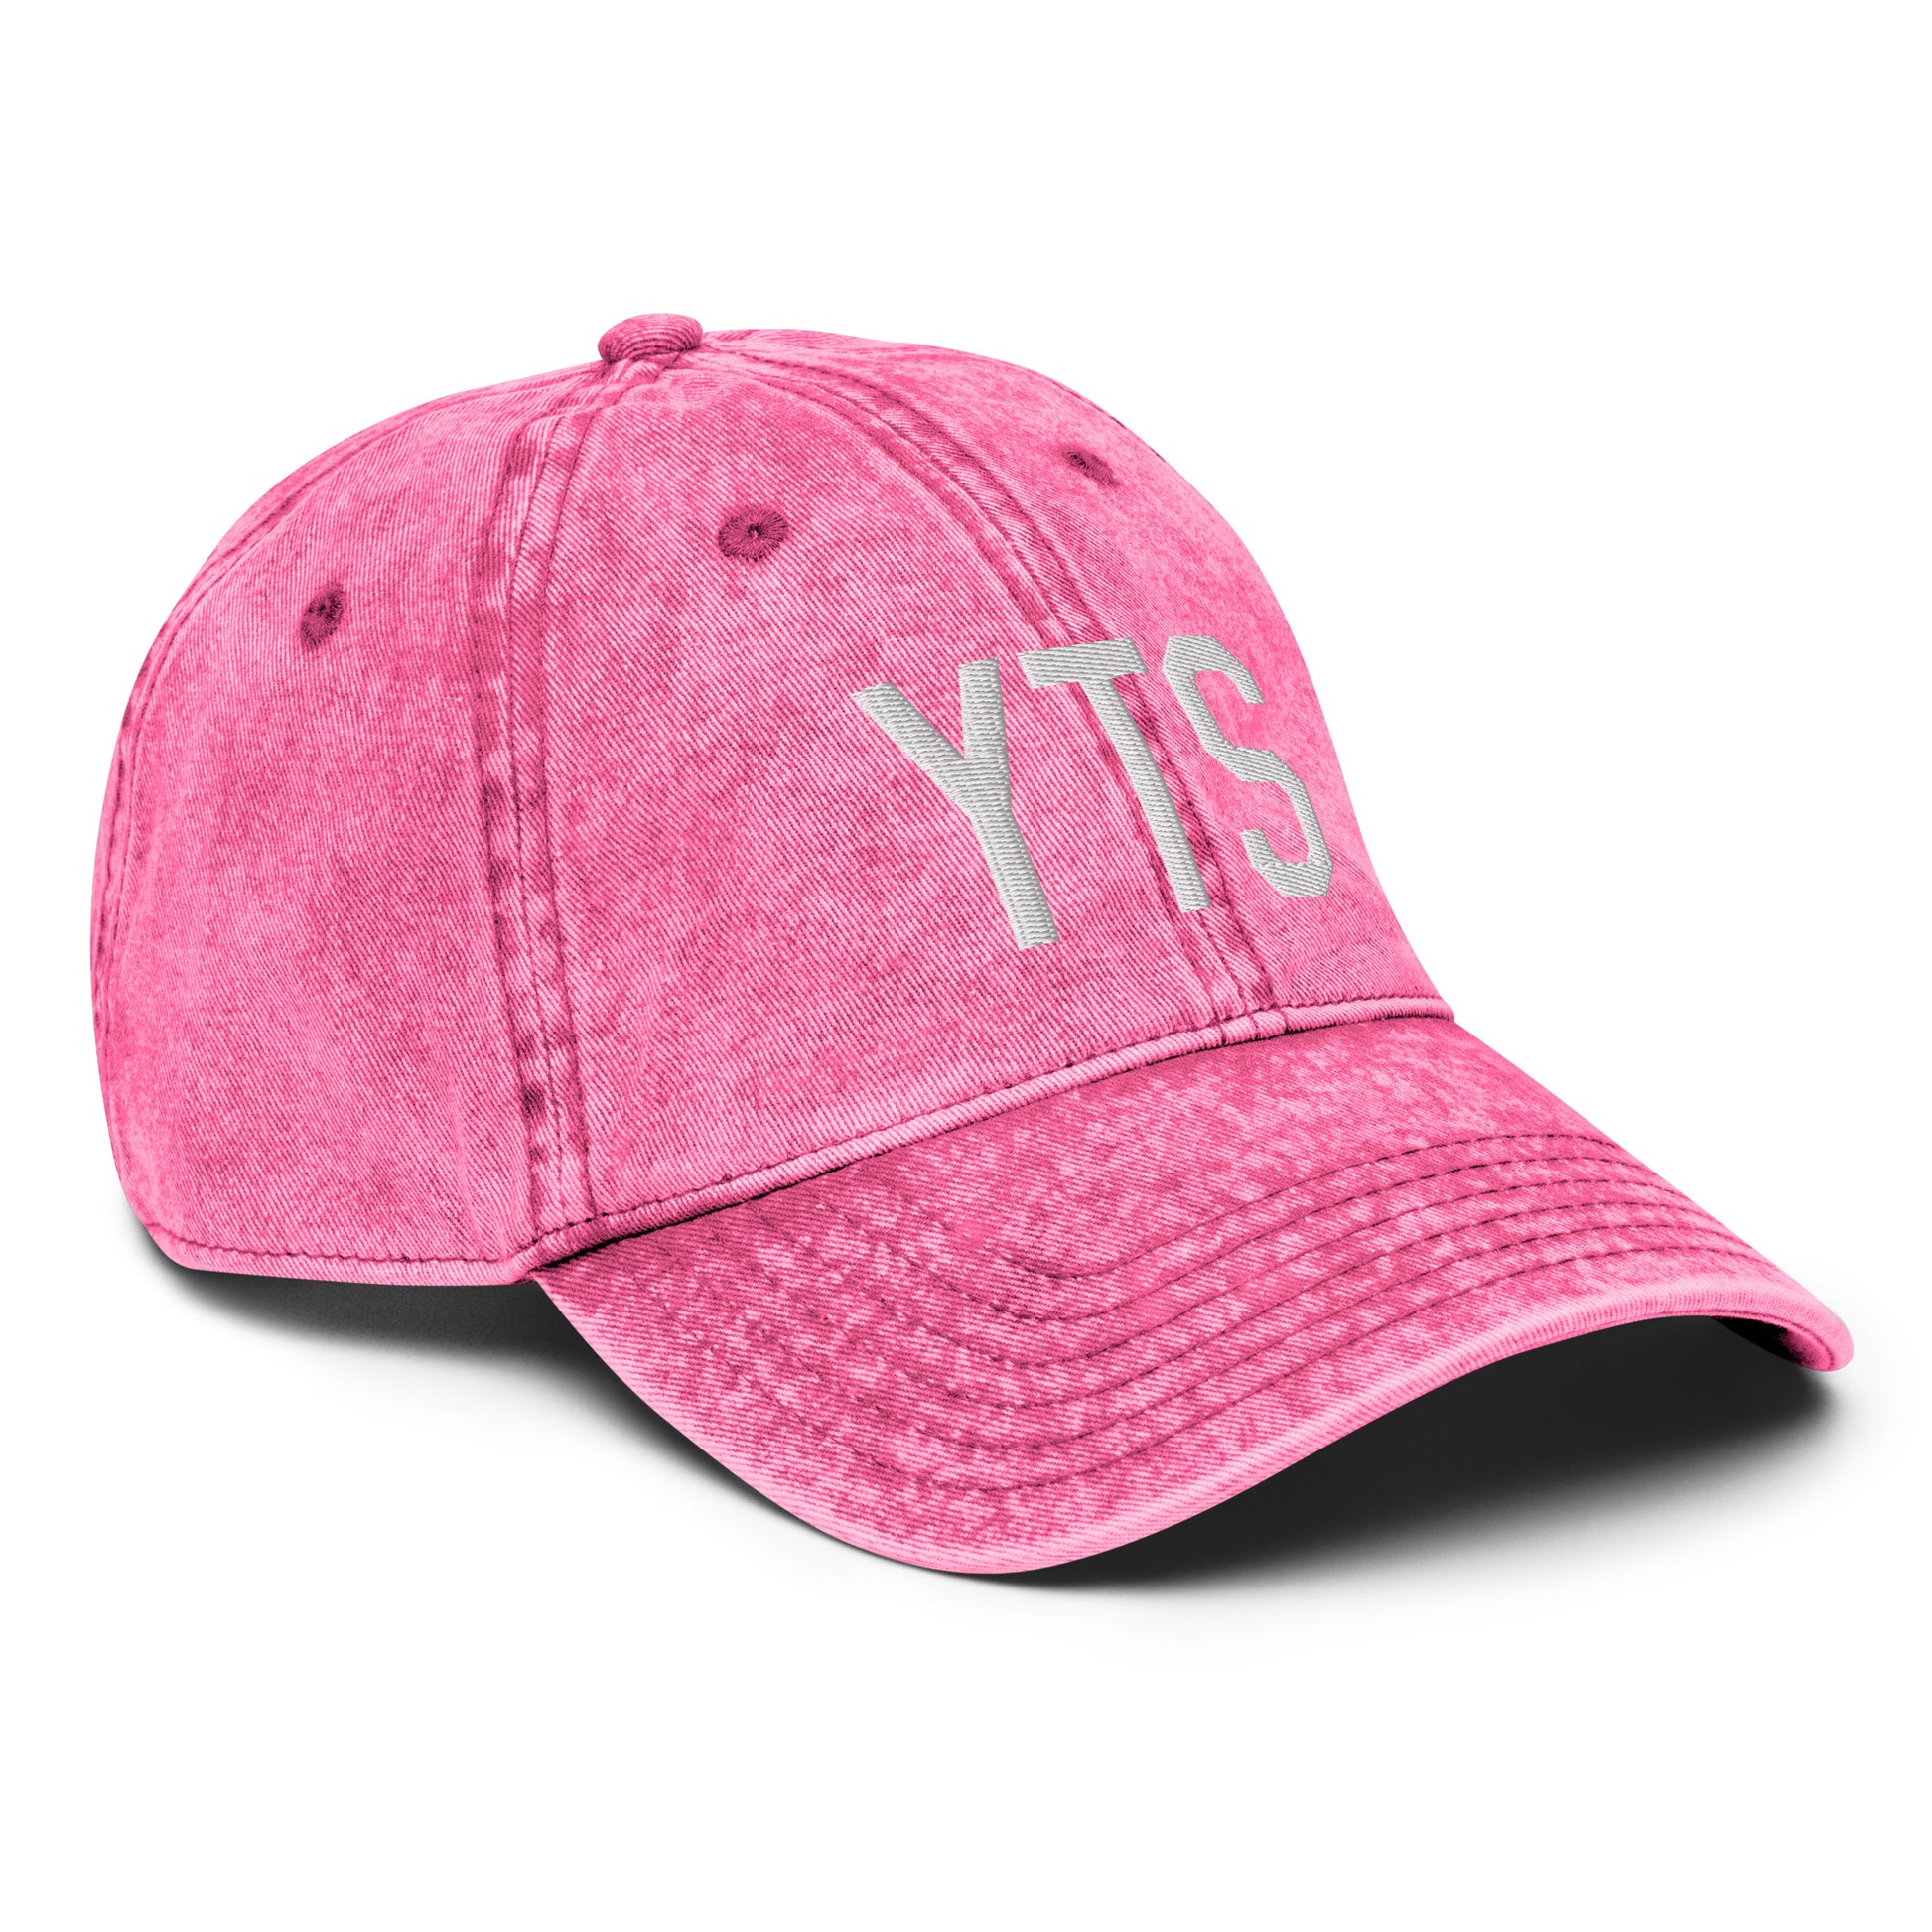 Airport Code Twill Cap - White • YTS Timmins • YHM Designs - Image 27